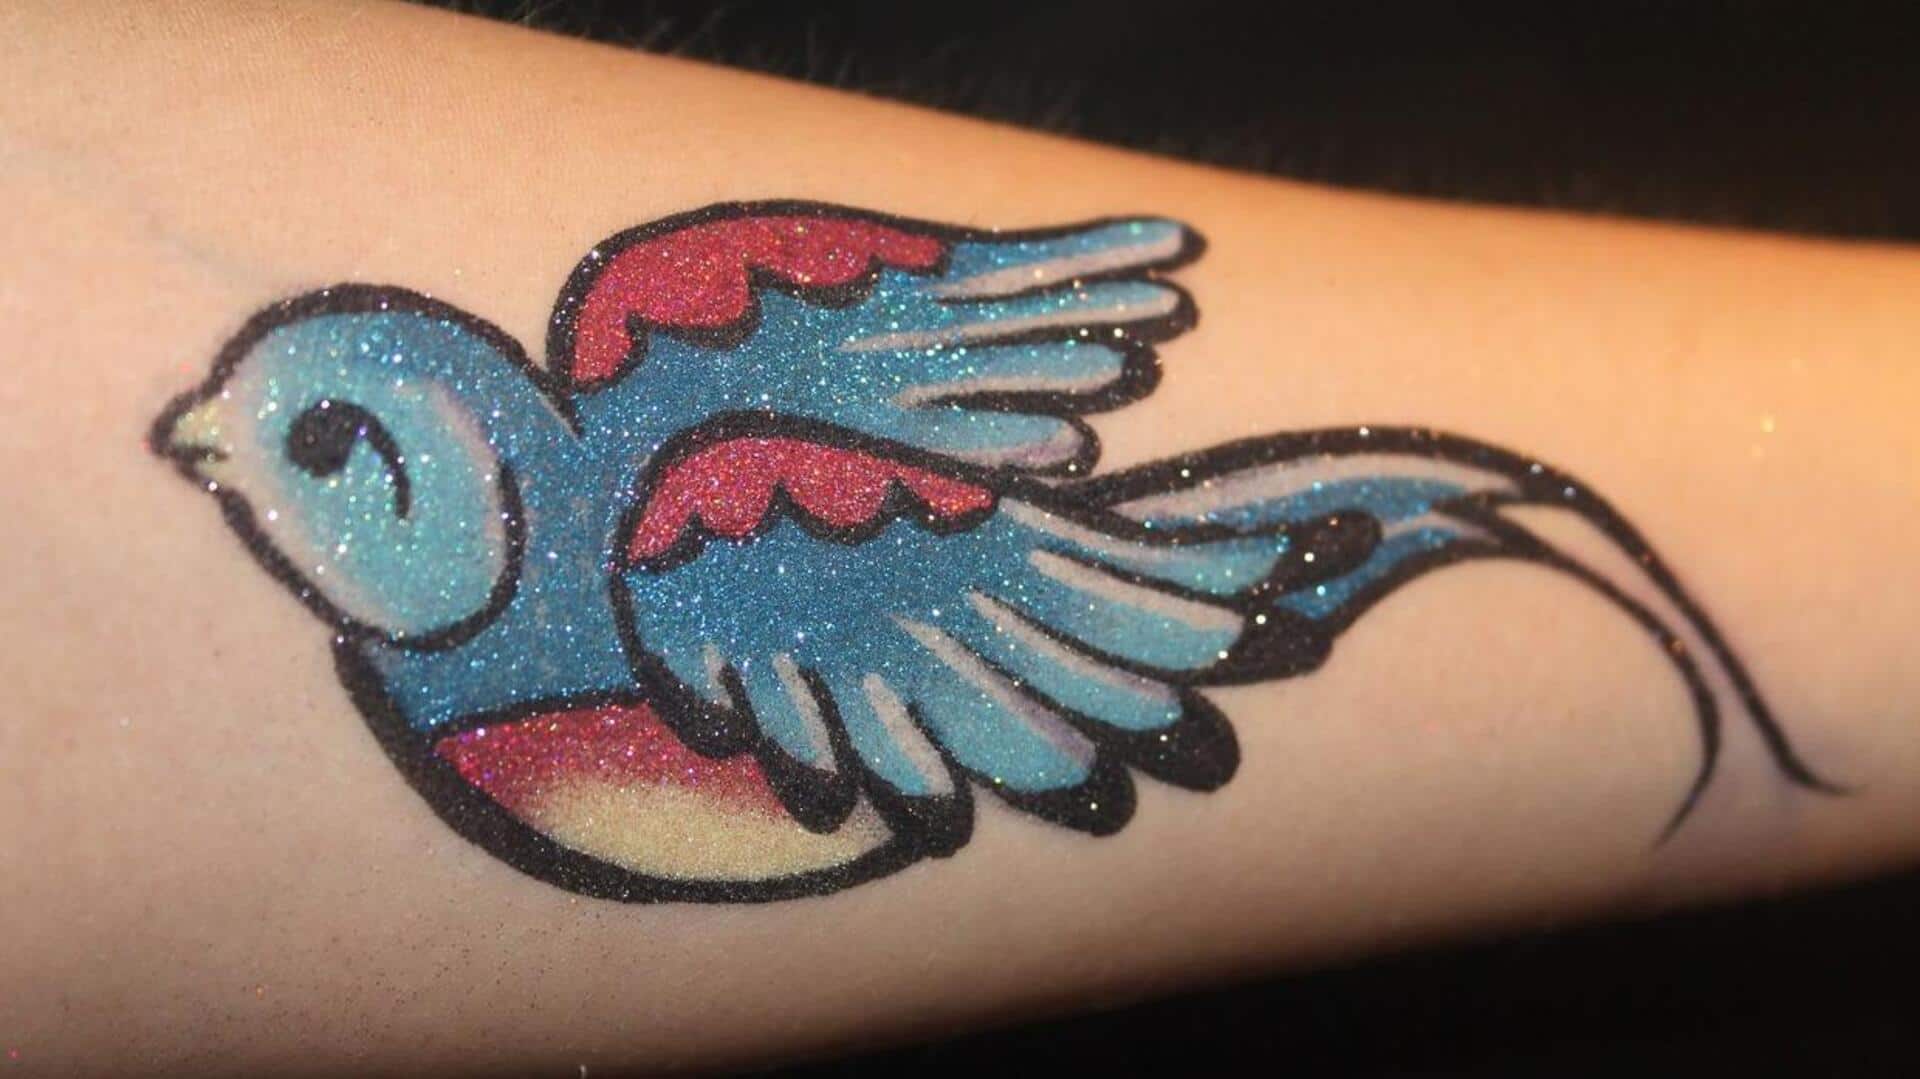 Glitter Tattoos by Amplified Artistry | Waterproof and last 3-7 days